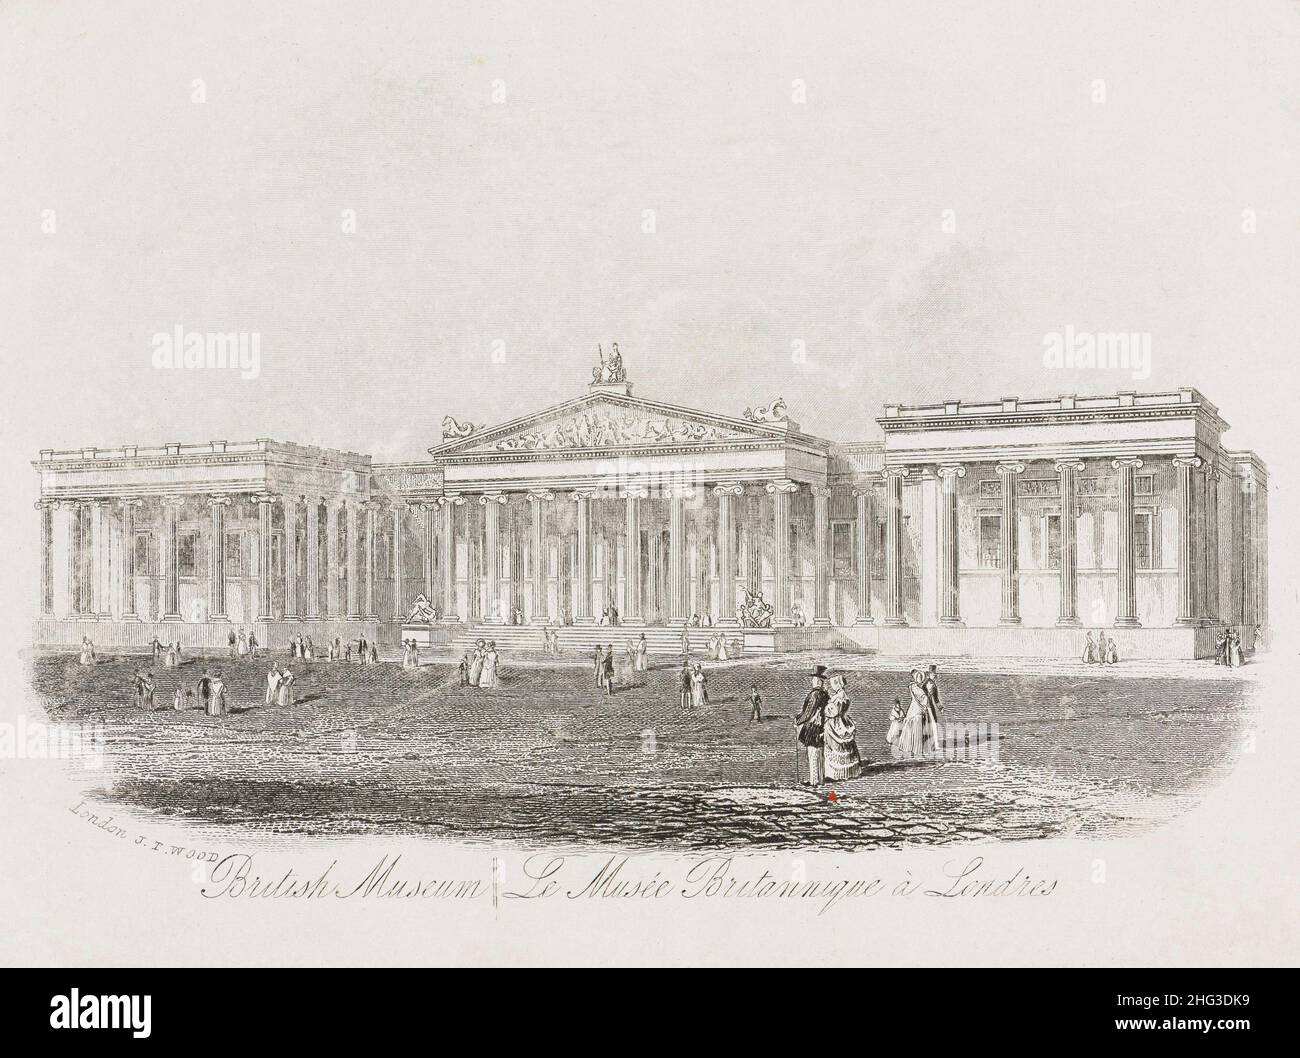 Engraving of British Museum in London. 1862 The British Museum is a public institution dedicated to human history, art and culture located in the Bloo Stock Photo